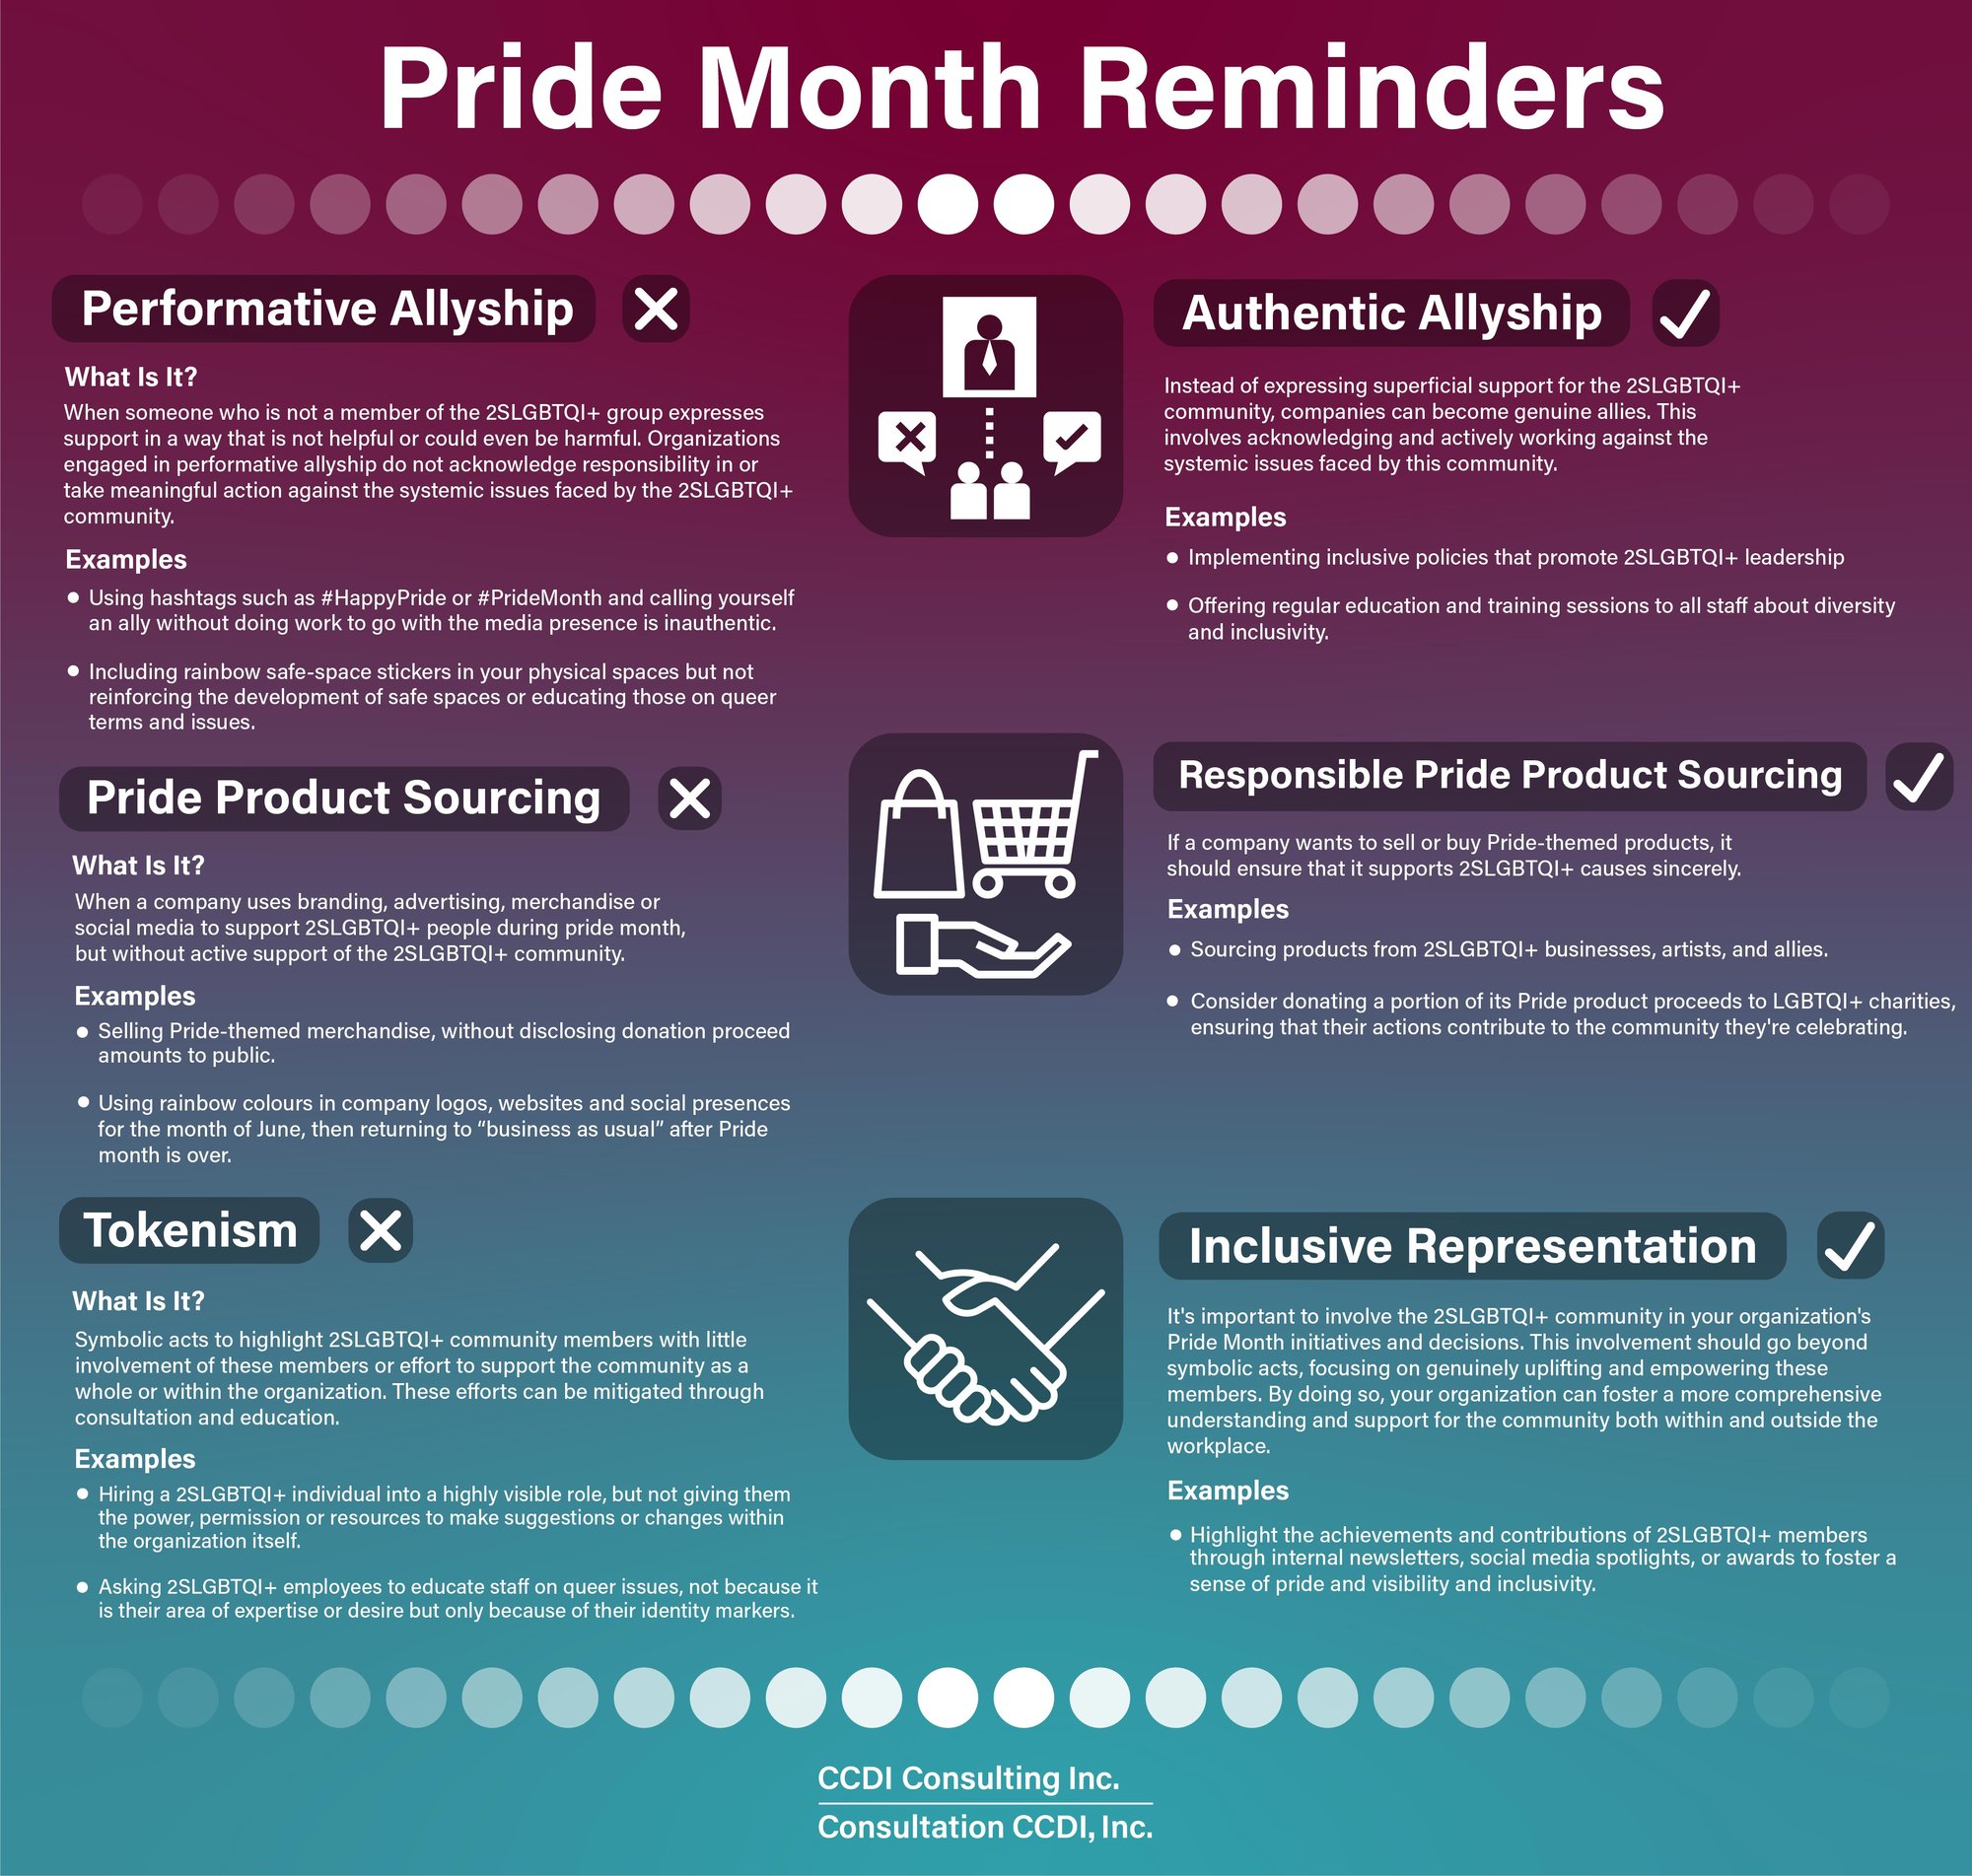 Pride Month Reminders Infographic